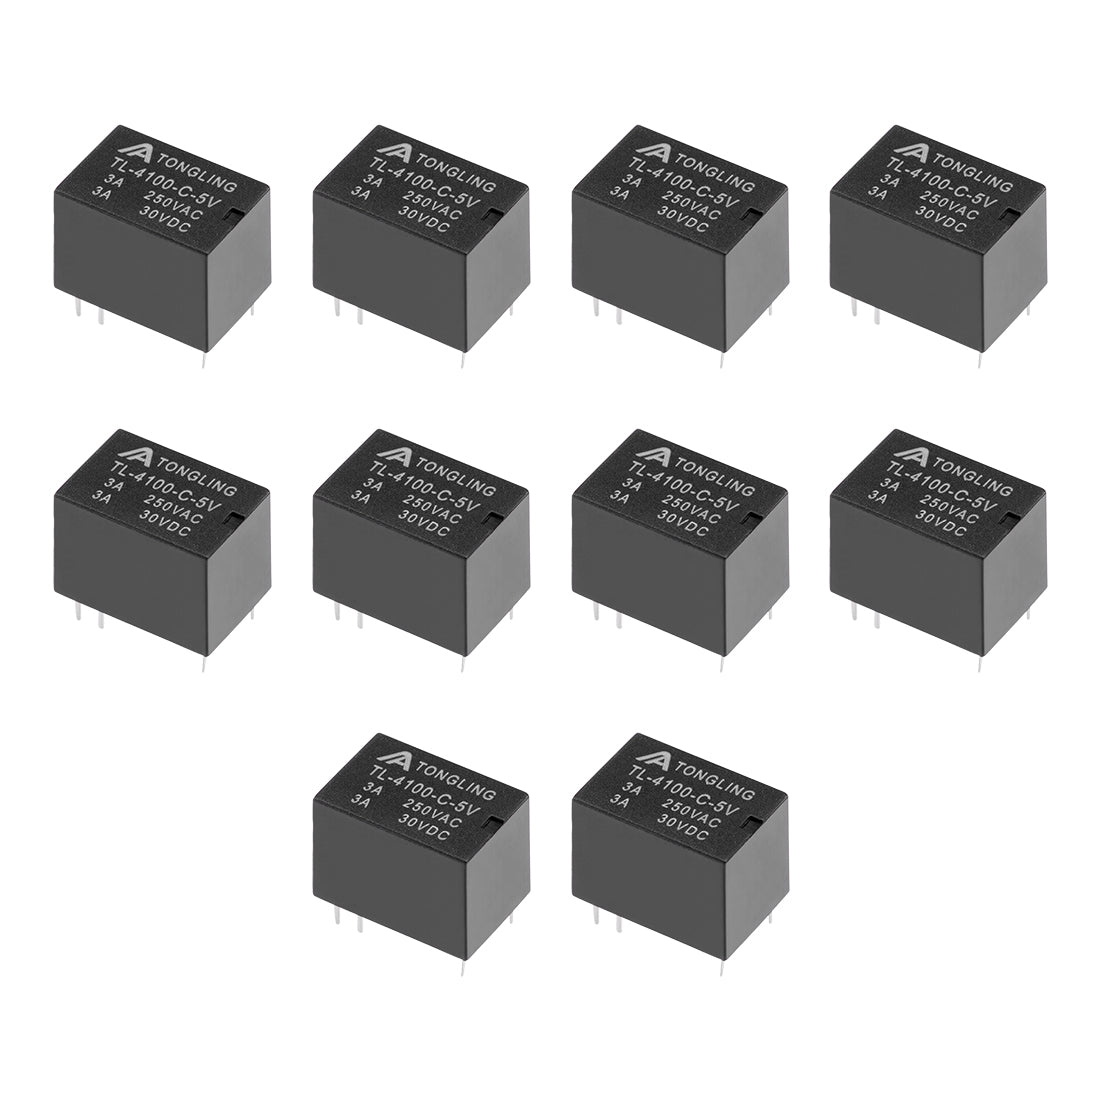 uxcell Uxcell 10 Pcs TL-4100-C-5V DC 5V Coil SPDT 6 Pin PCB Electromagnetic Power Relay NO+NC Black